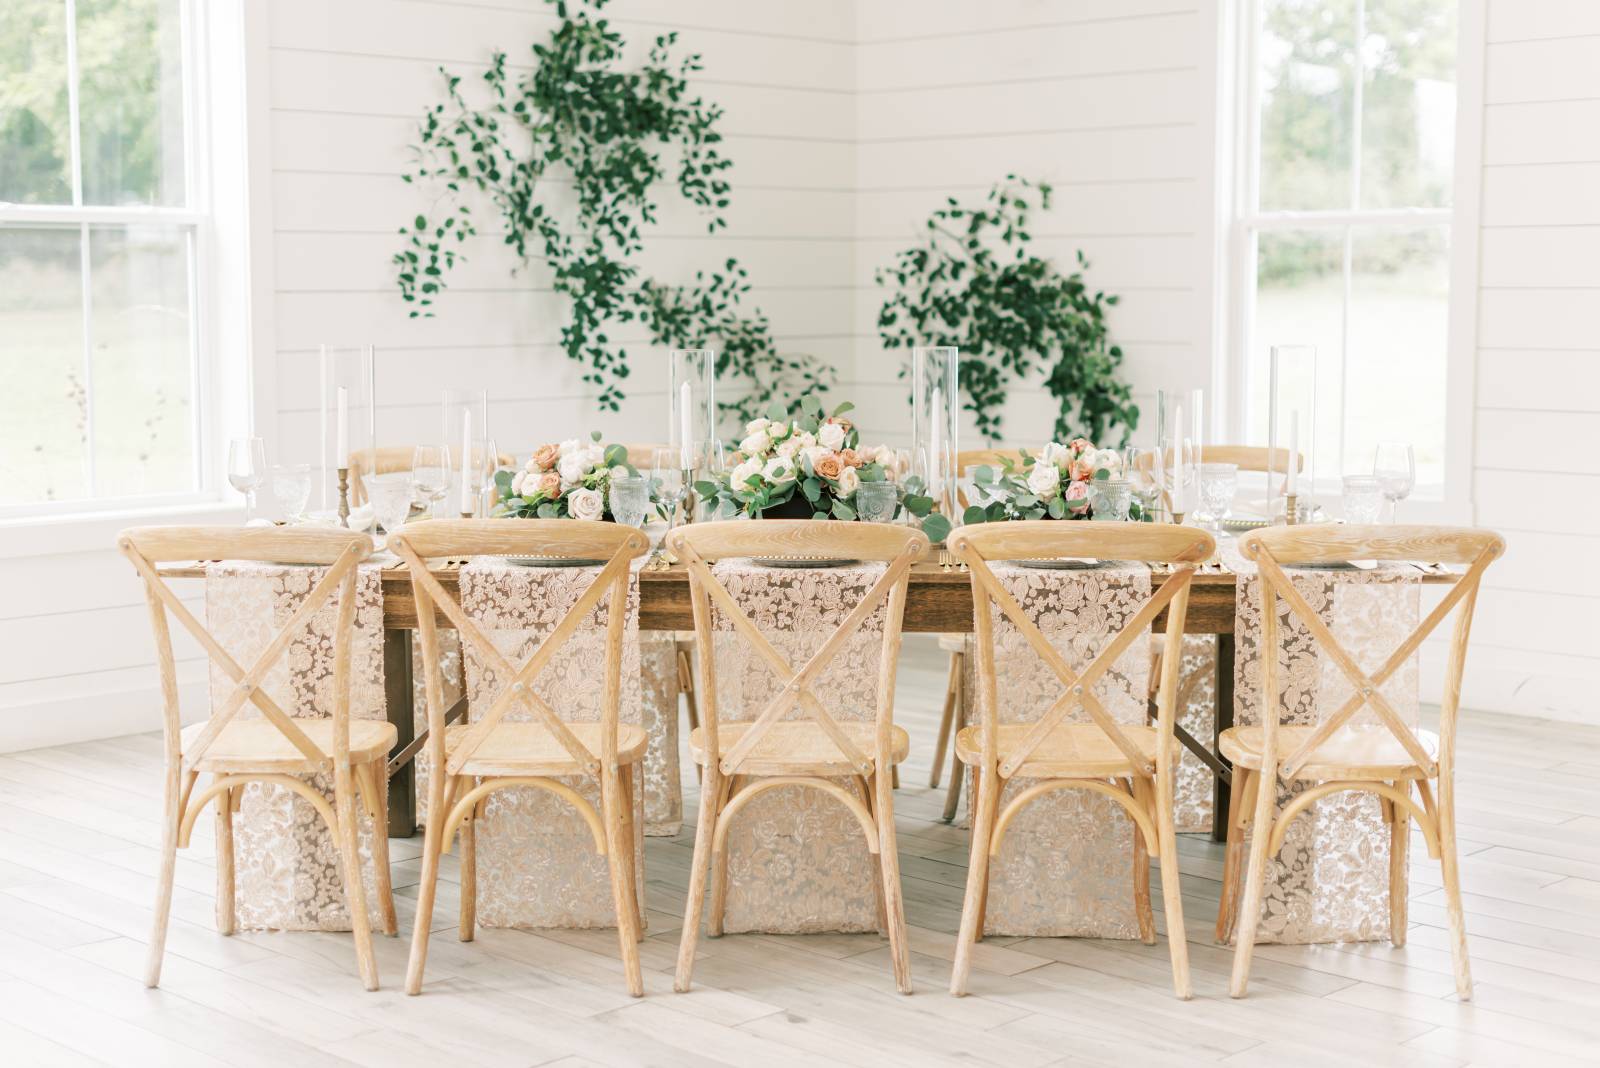 Lace head table